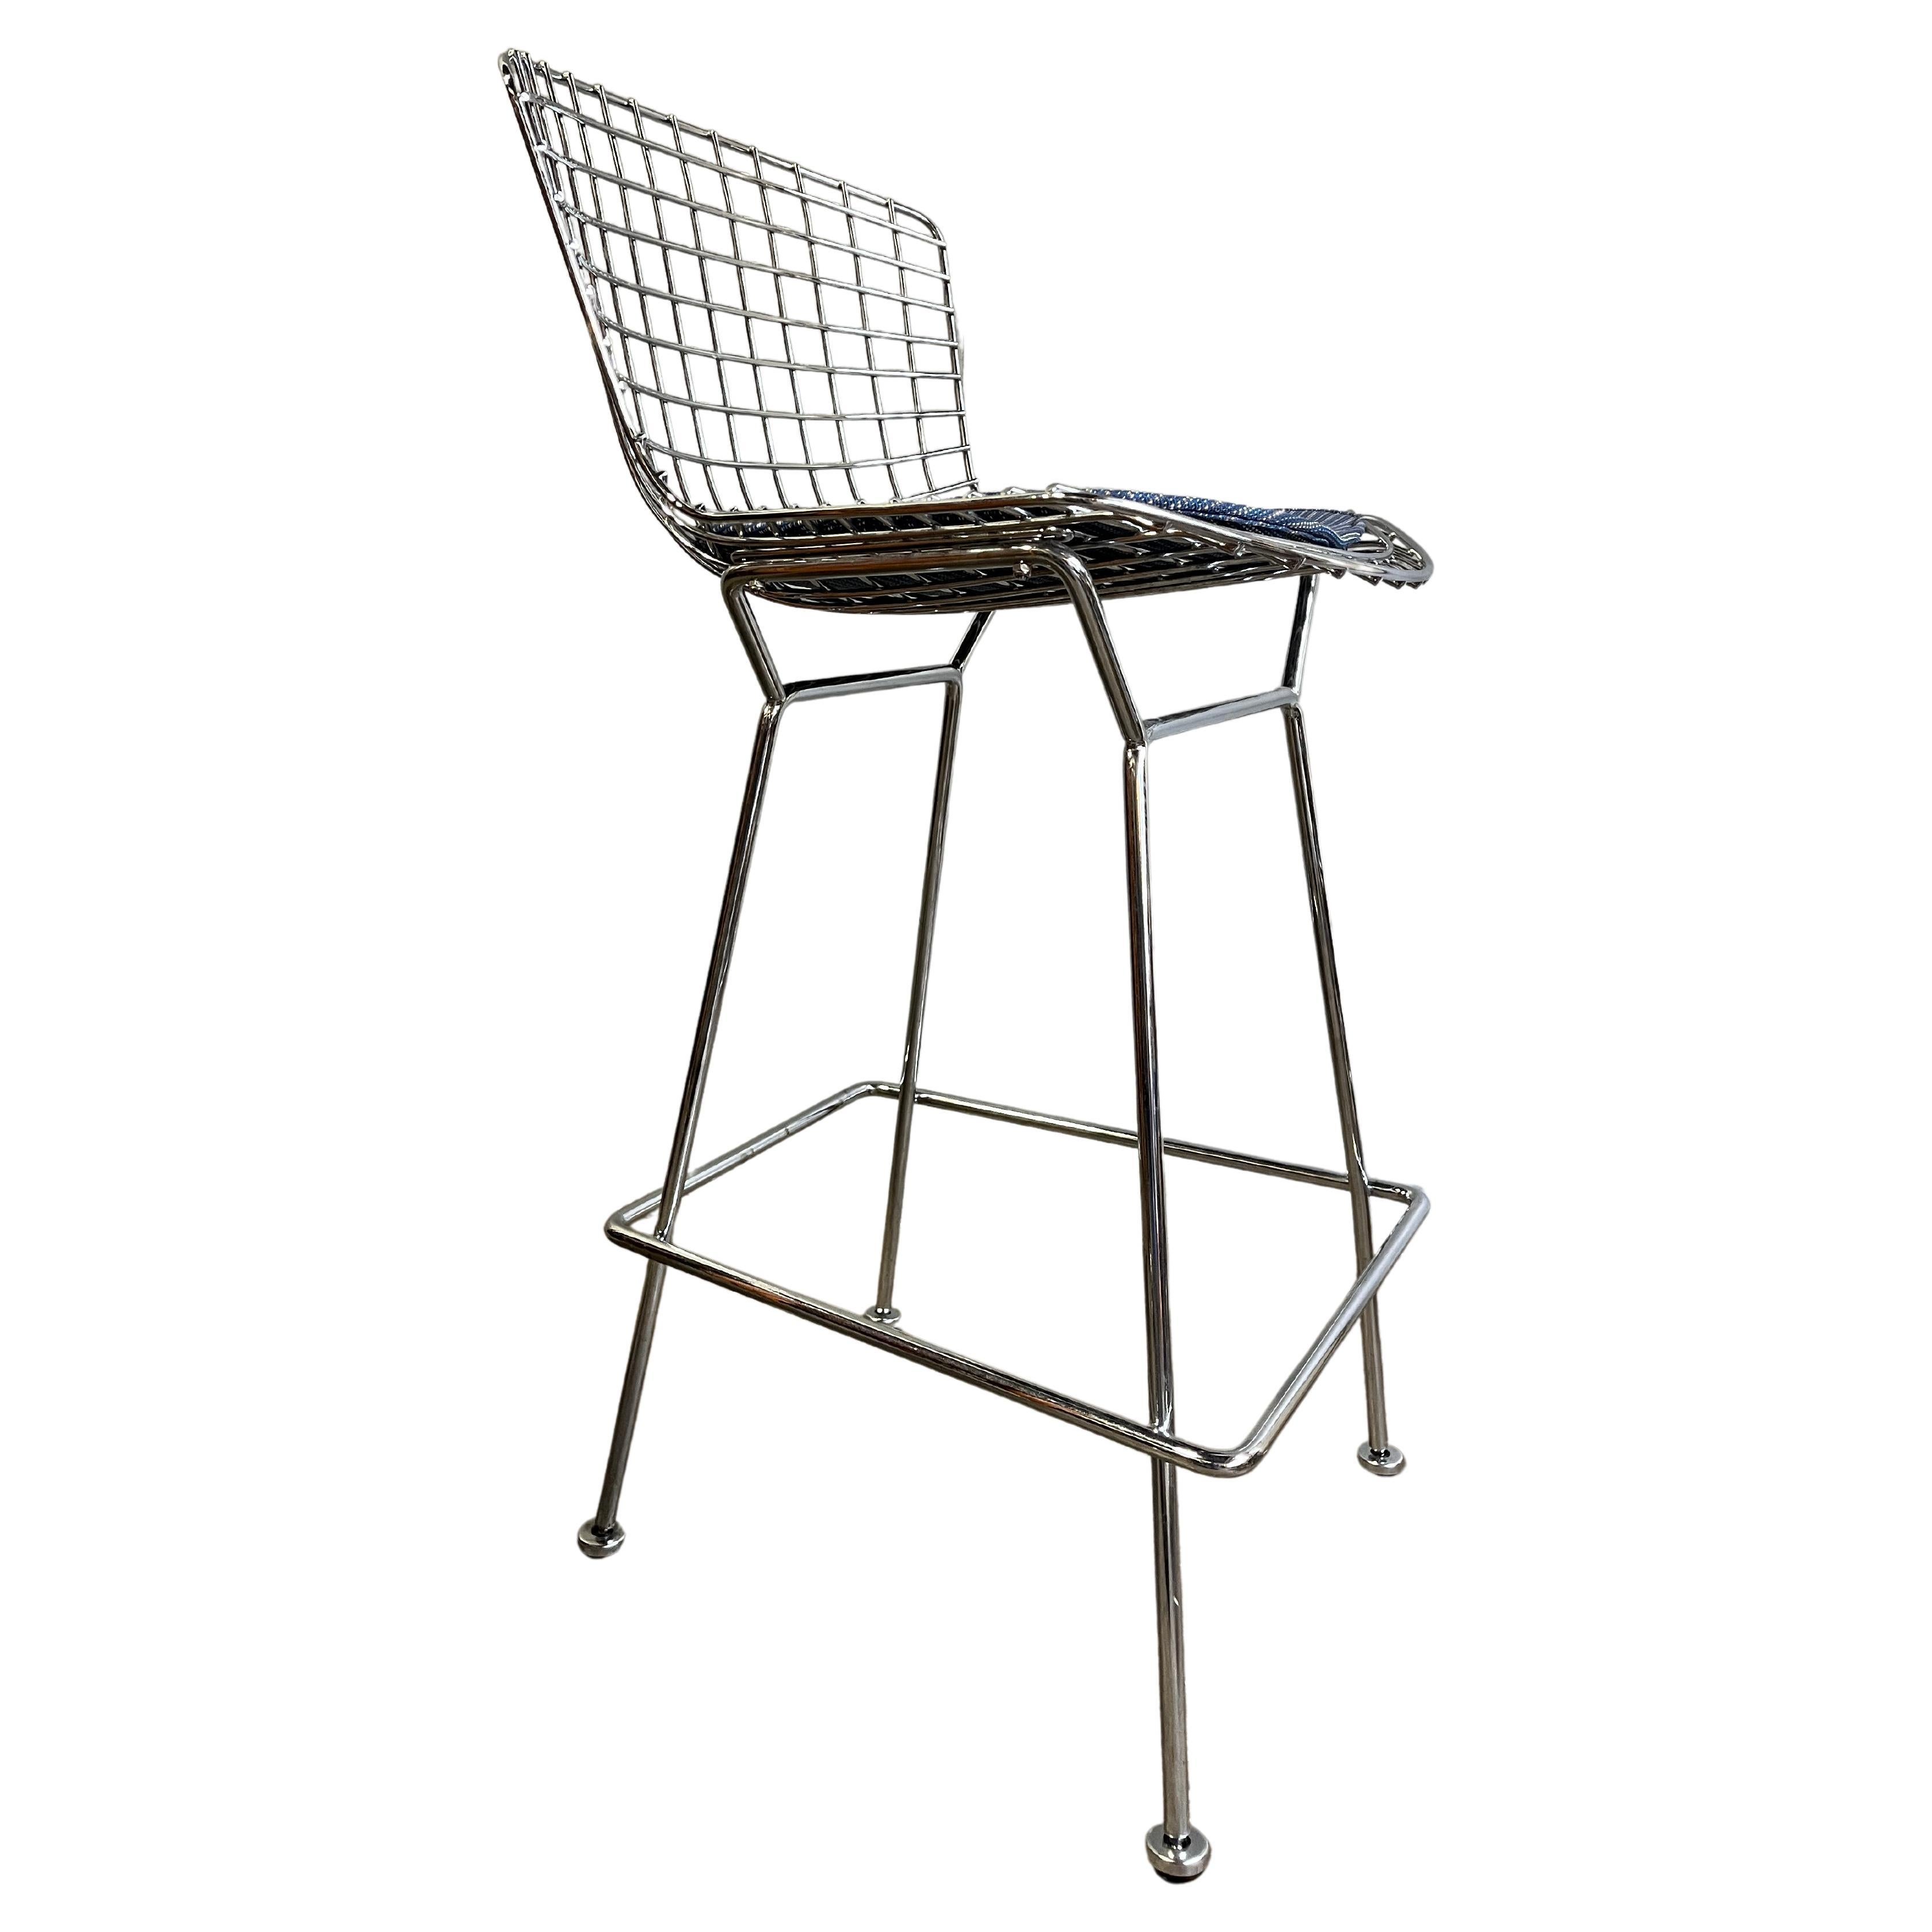 Mid century classic and iconic Bertoia for Knoll stools in a high chrome finish. Architectural design, clean original condition, ready to use. Very solid and sturdy showing no loss to chrome finish. Stamped Knoll on the frame. 



Good for height of